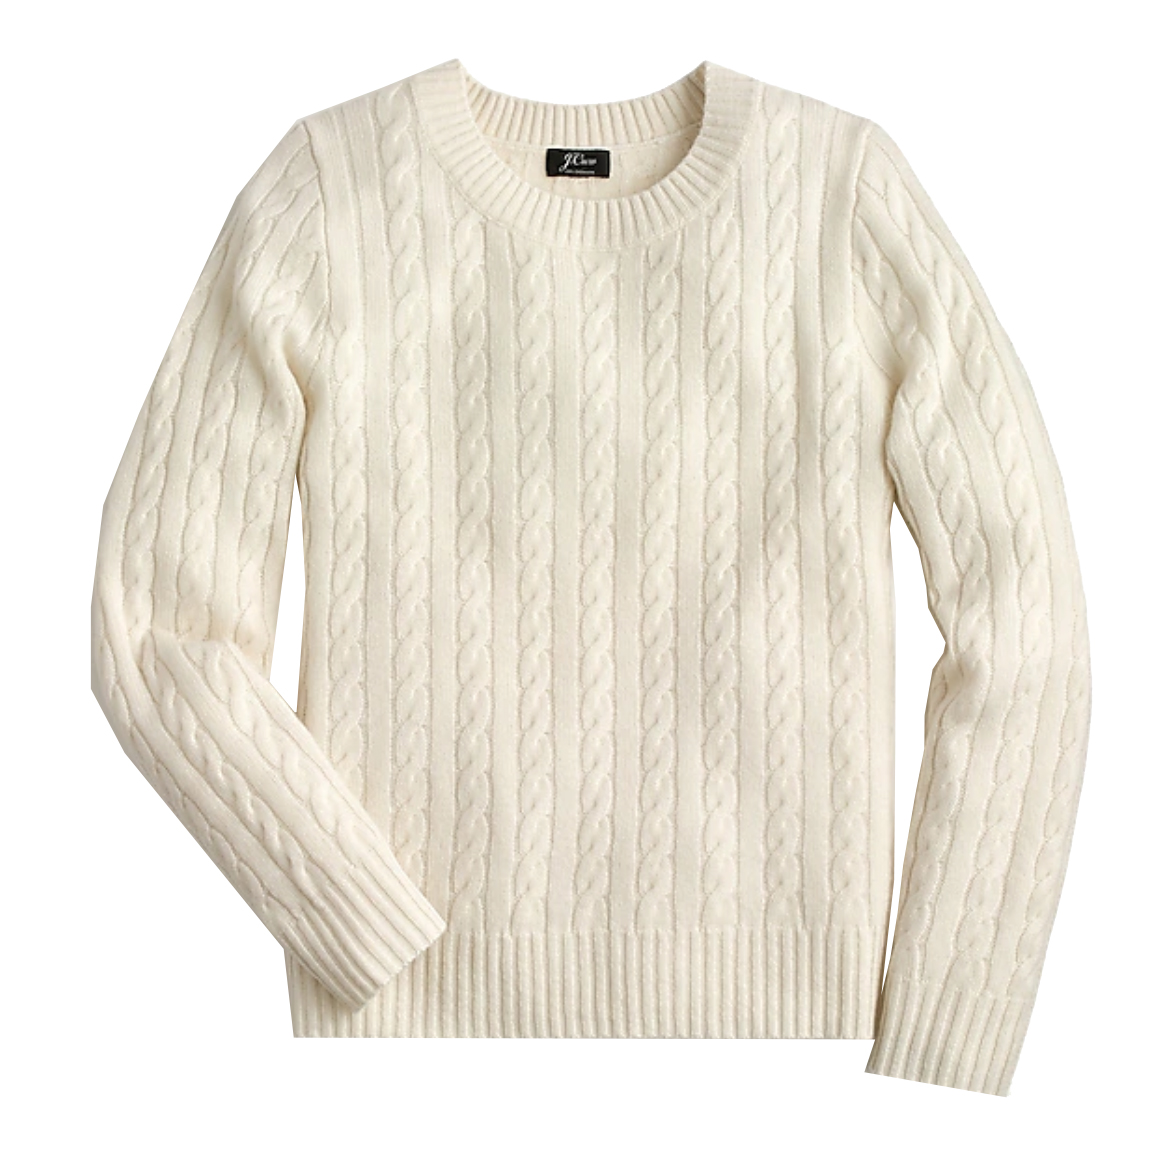 Cableknit Cashmere